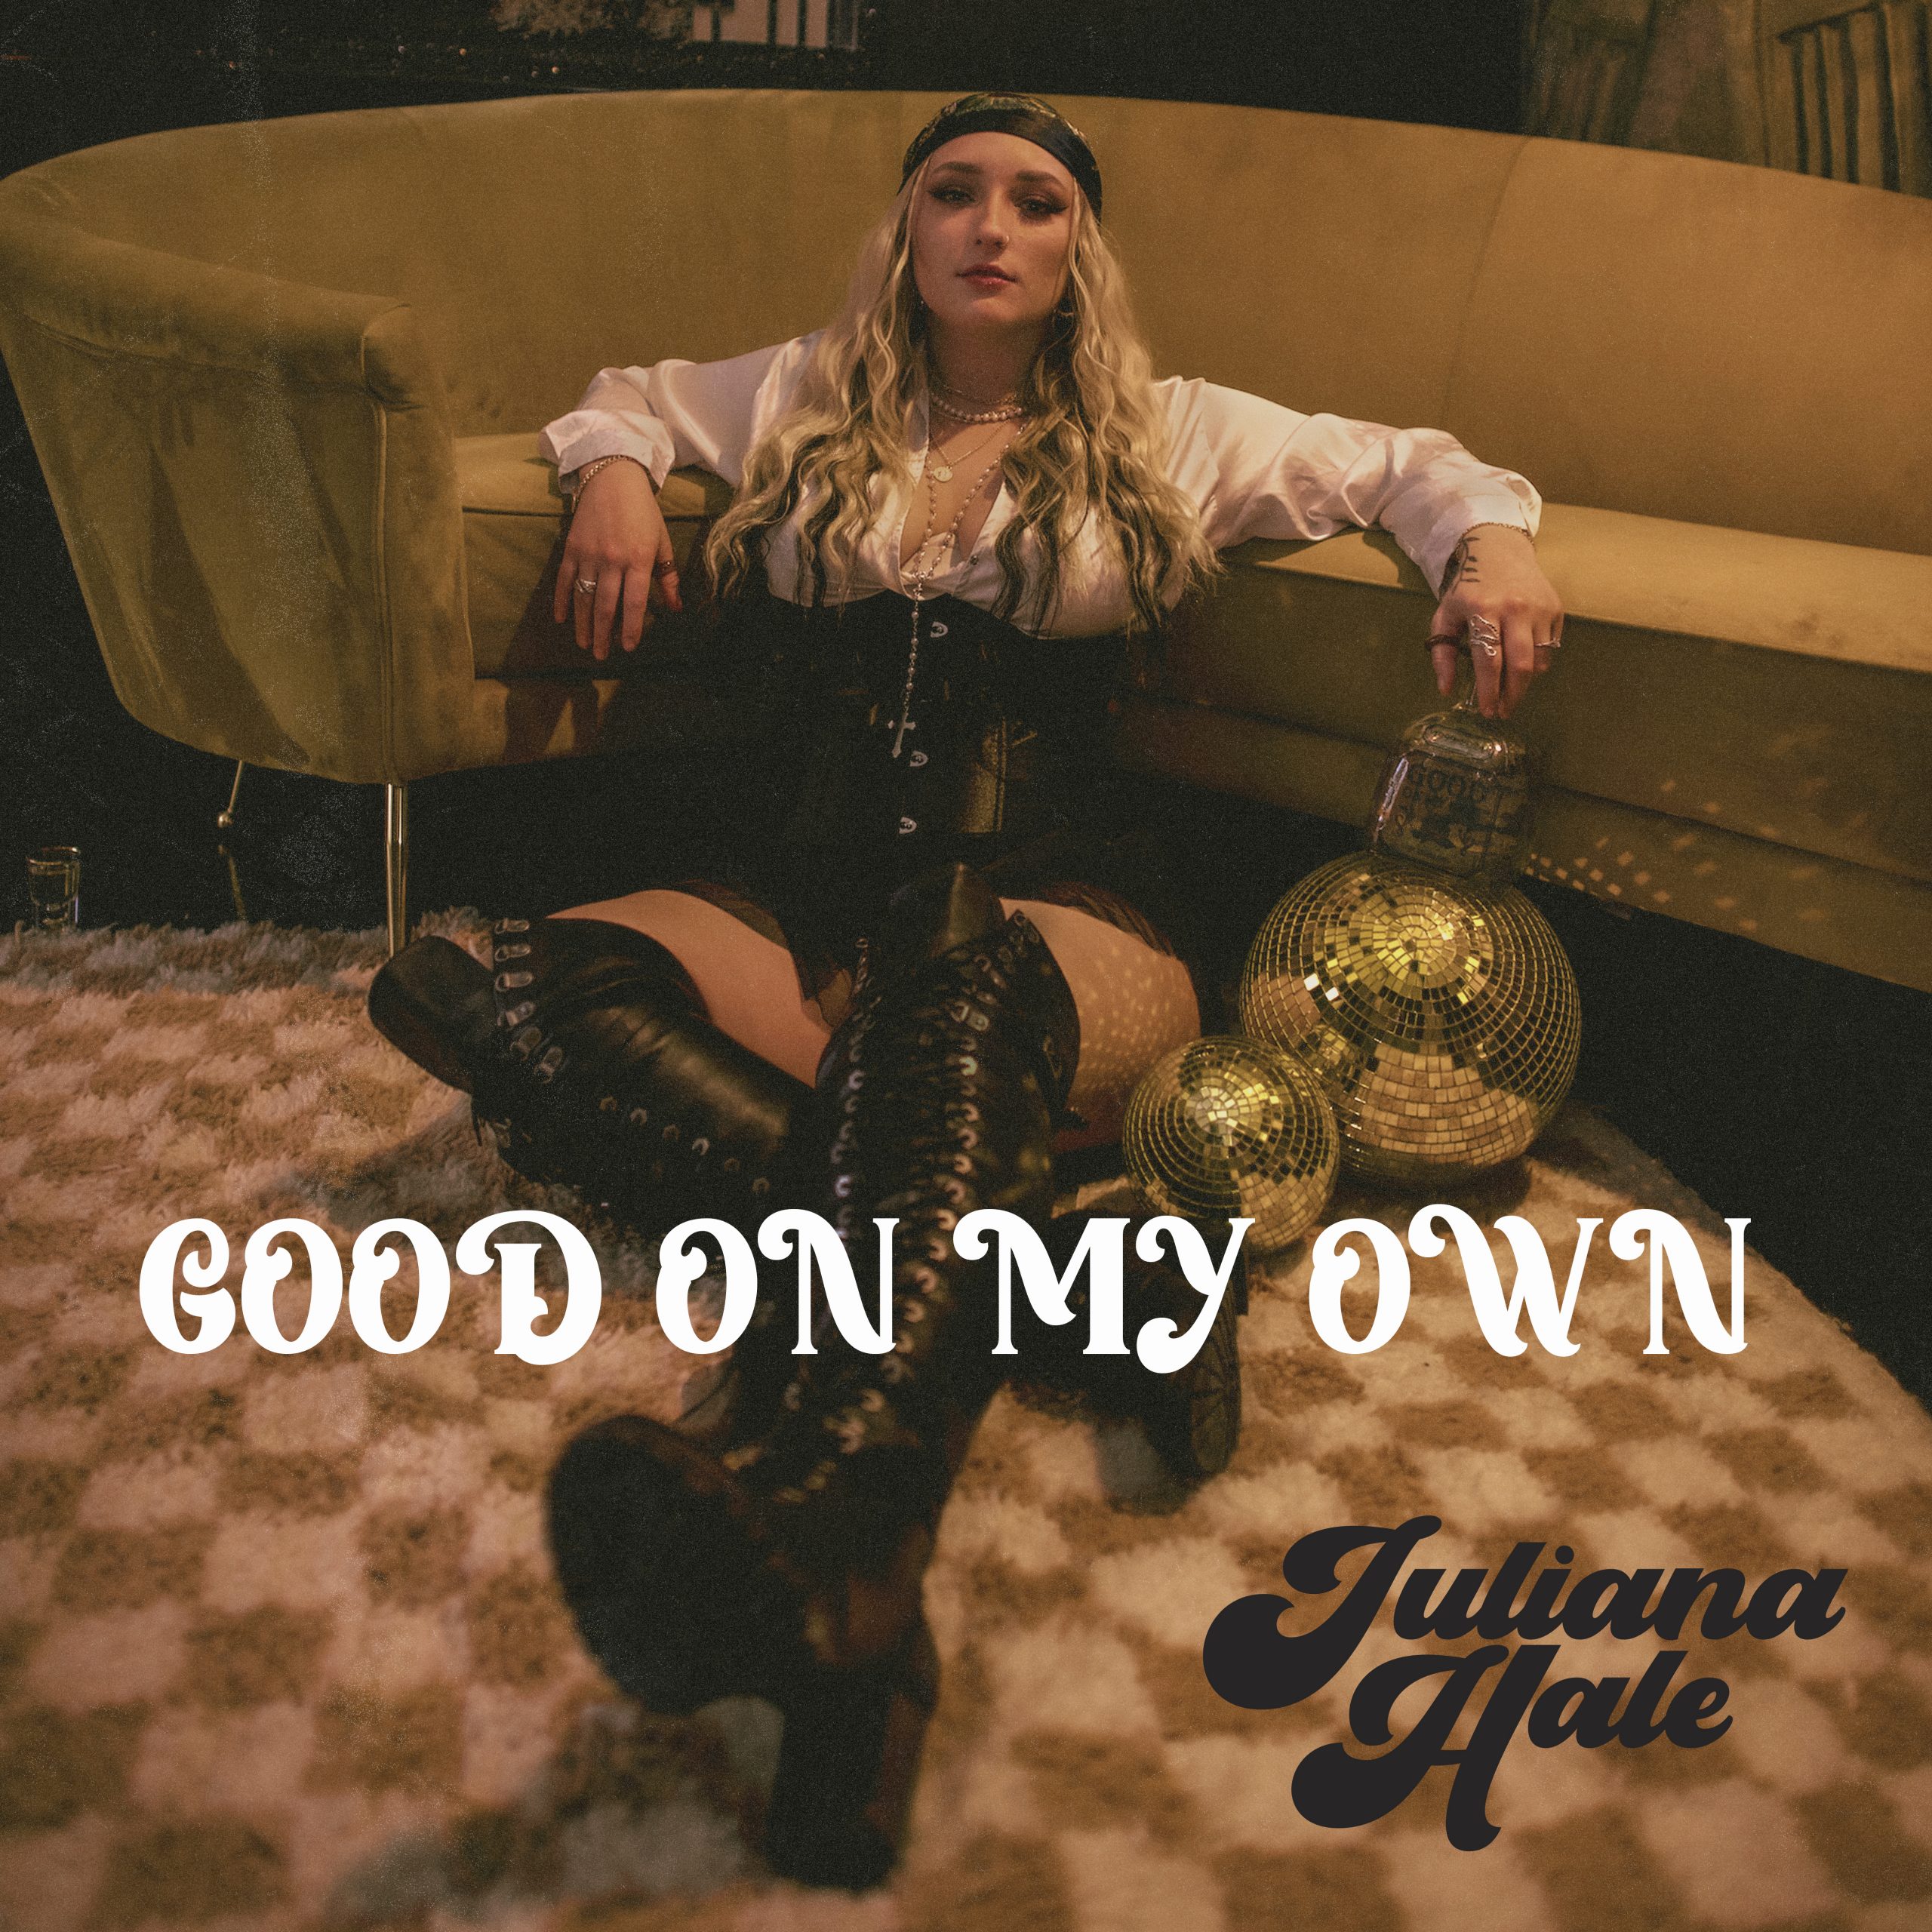 Juliana Hale, the Rising Star, Hits the Bafana FM Digital Daily A-List with ‘Good on my Own’ – A Resounding Declaration of Independence